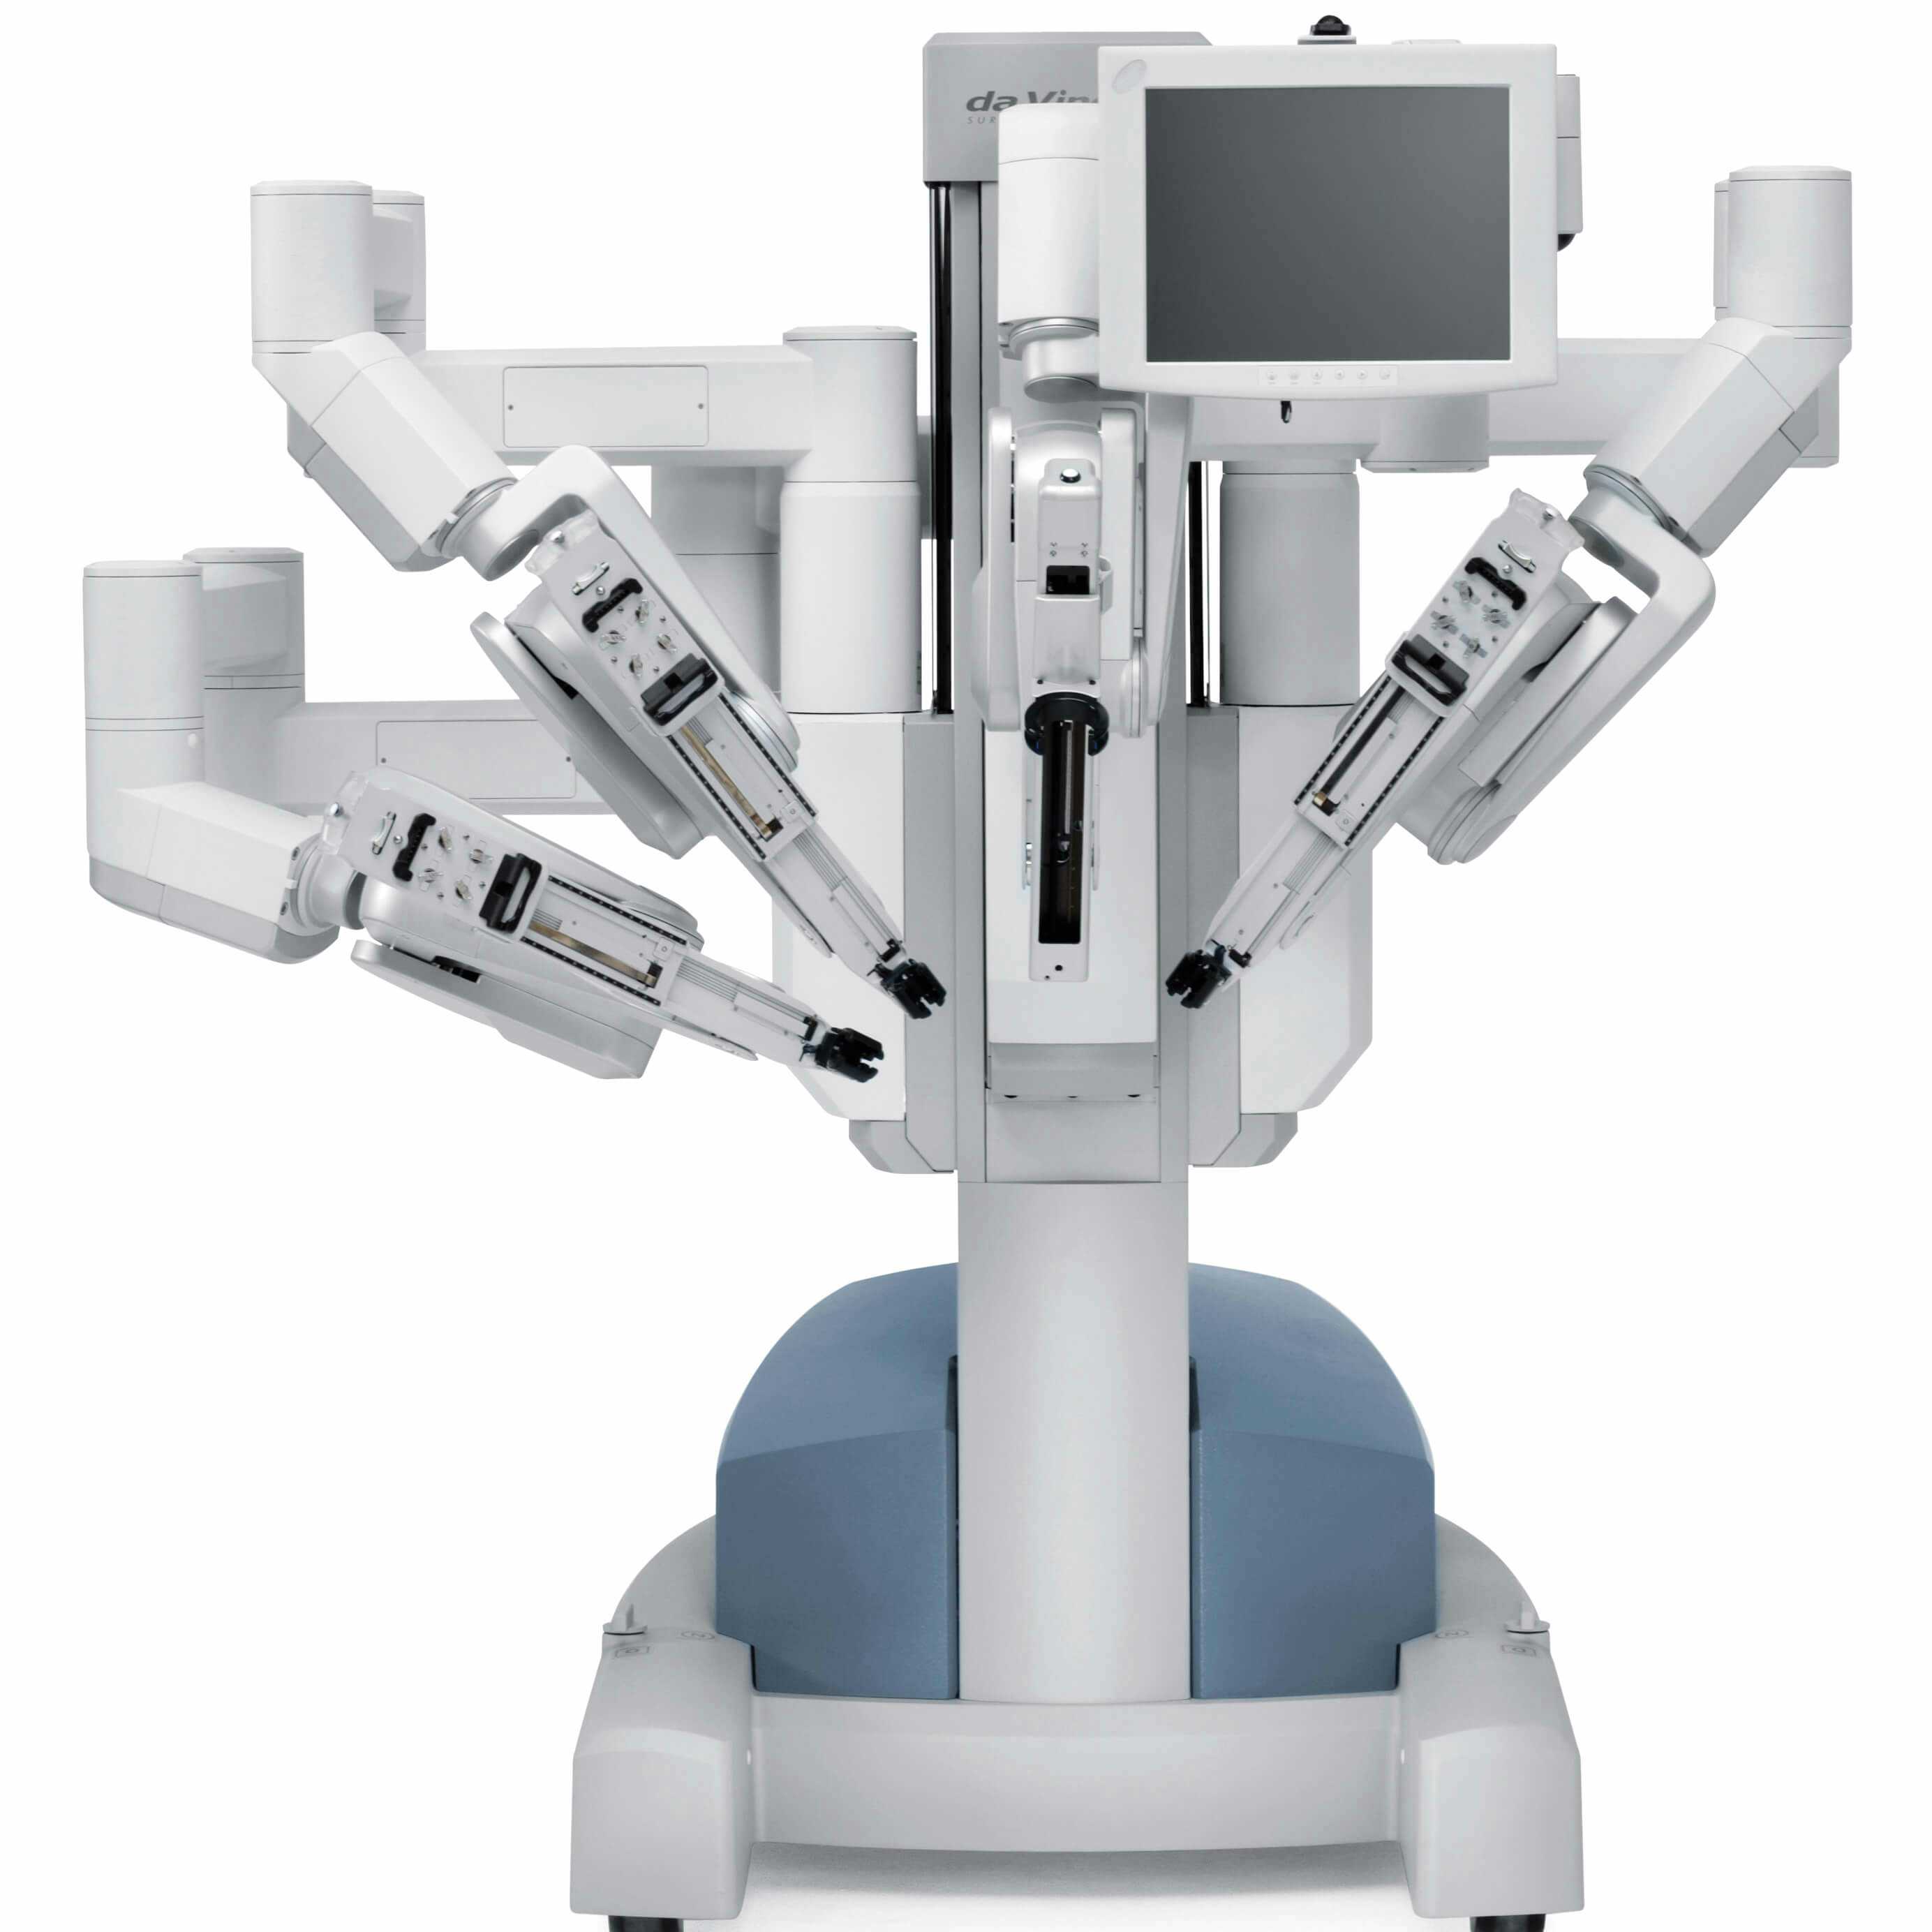 Robotic Surgery System Causes Substantial Injuries